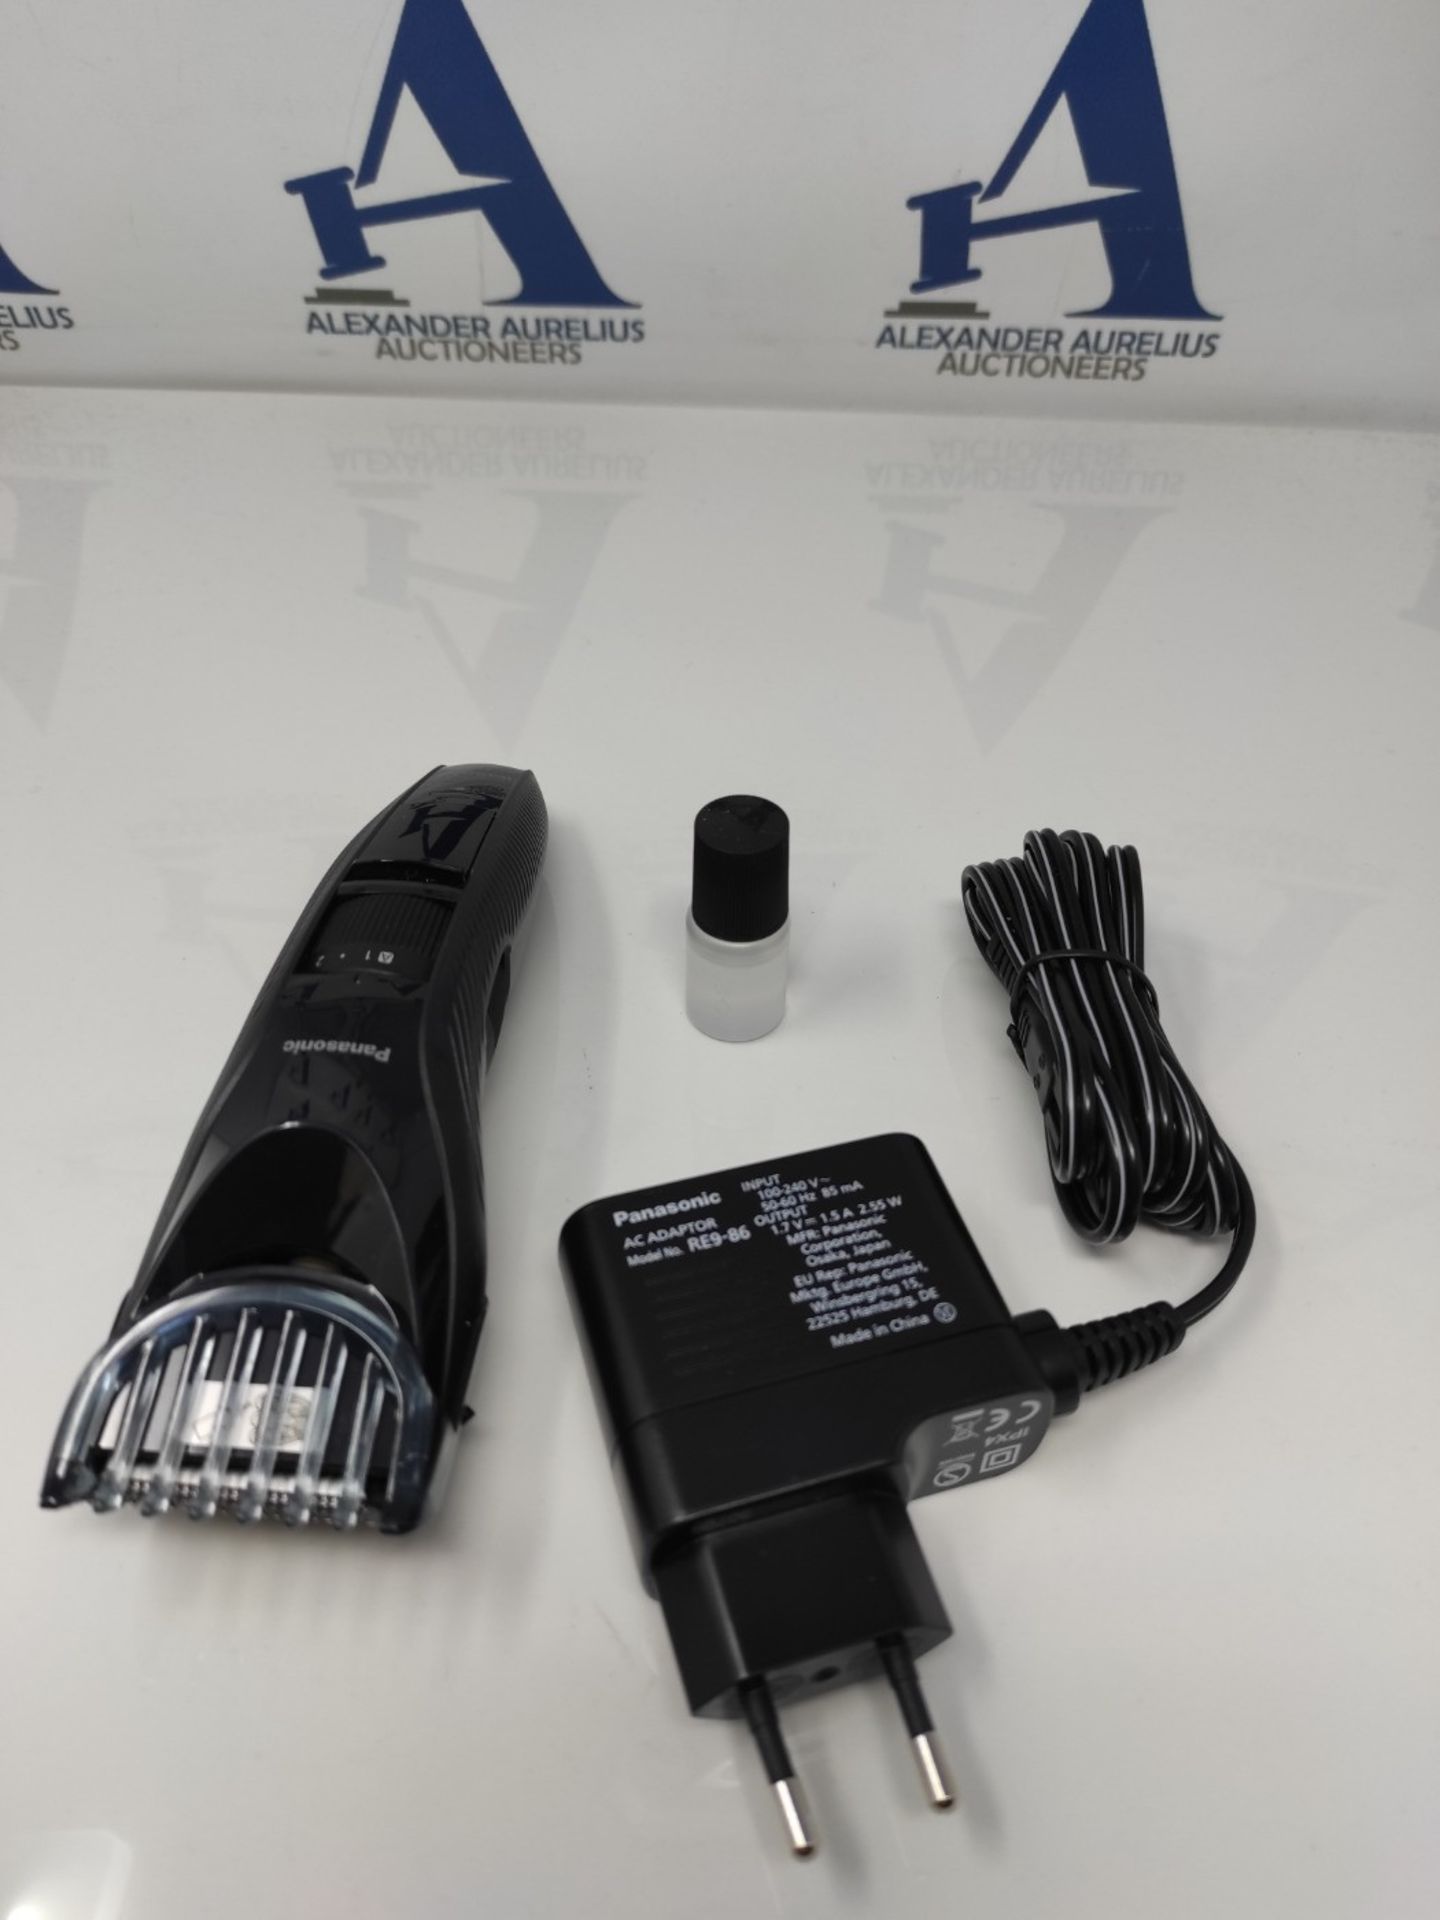 Panasonic ER-GC53 Hair Clipper with 19 cutting lengths (1-10 mm), washable, black - Image 2 of 2